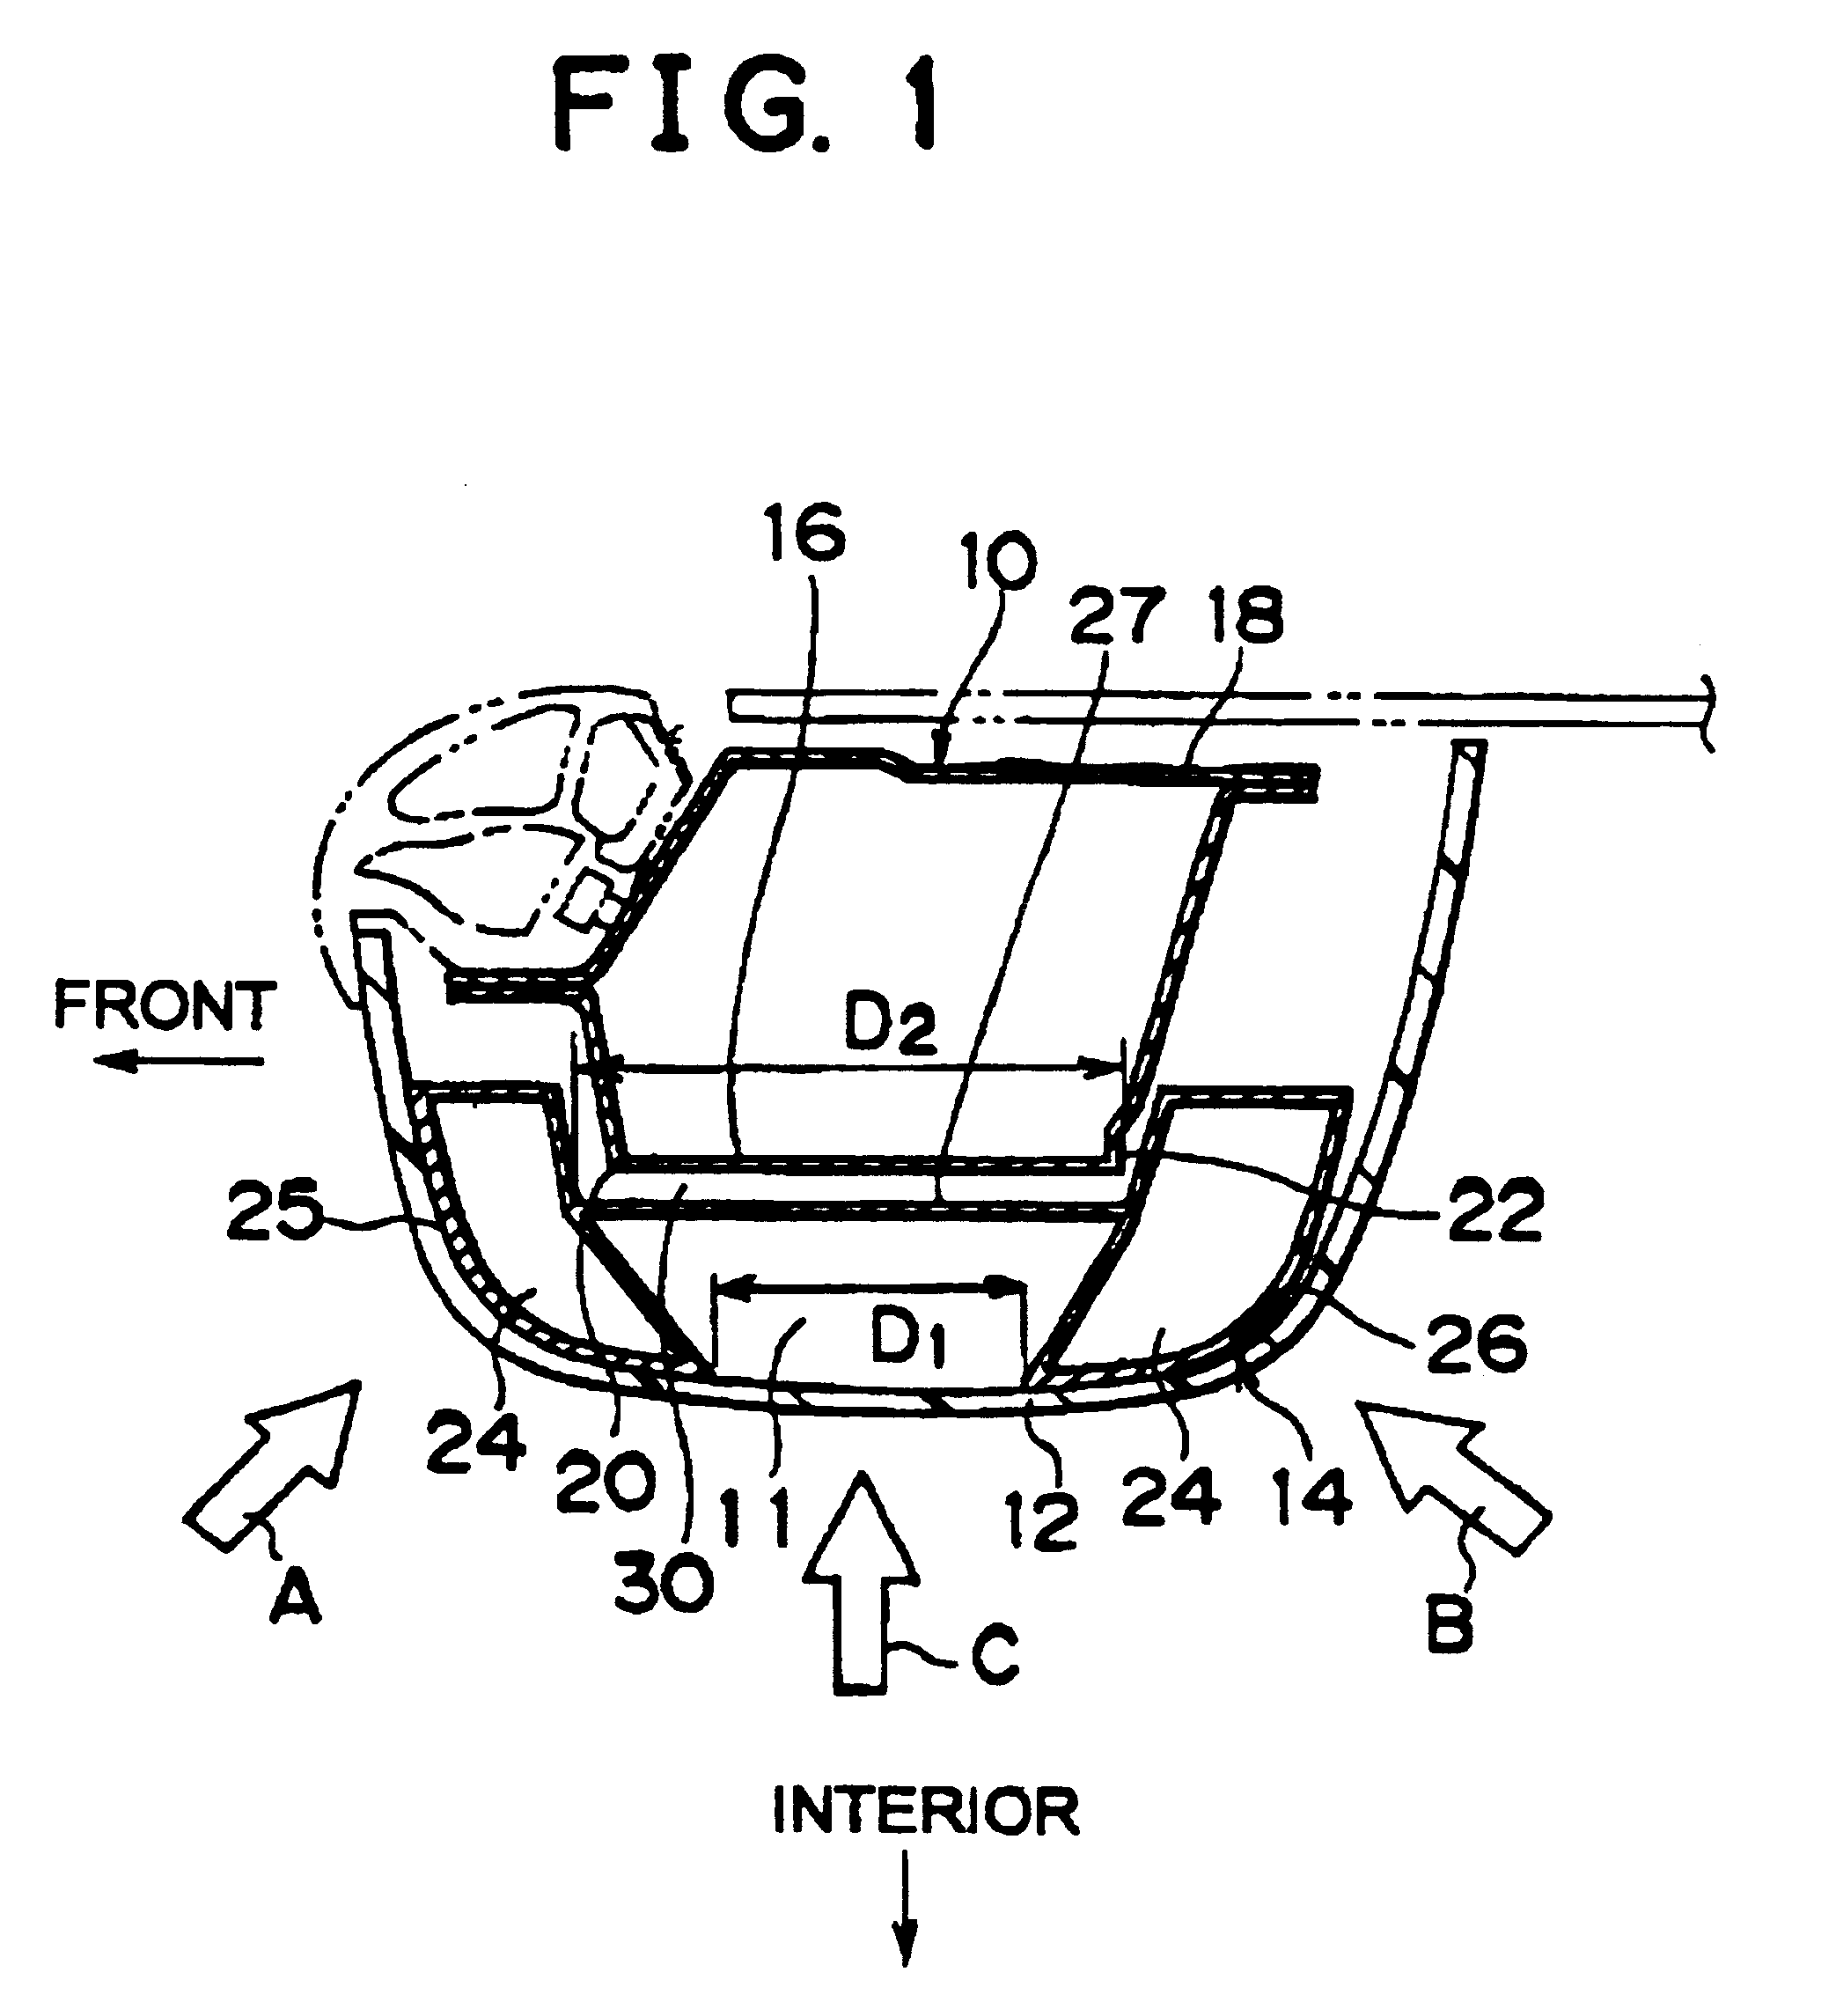 Impact energy absorbing structure for upper part of body of motor vehicle and energy absorber